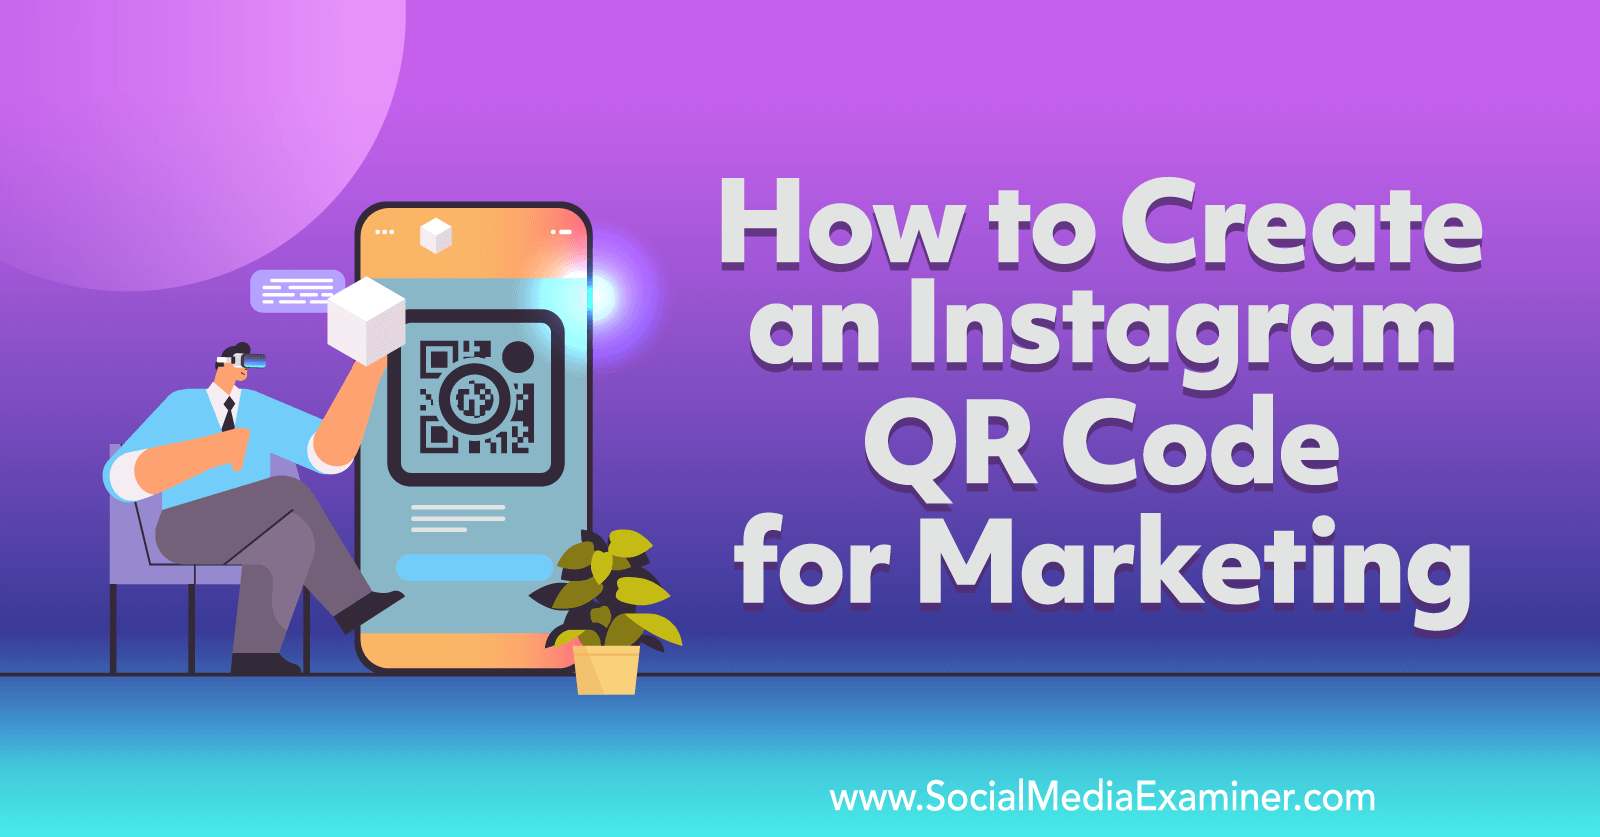 How to Create an Instagram QR Code for Marketing-Social Media Examiner